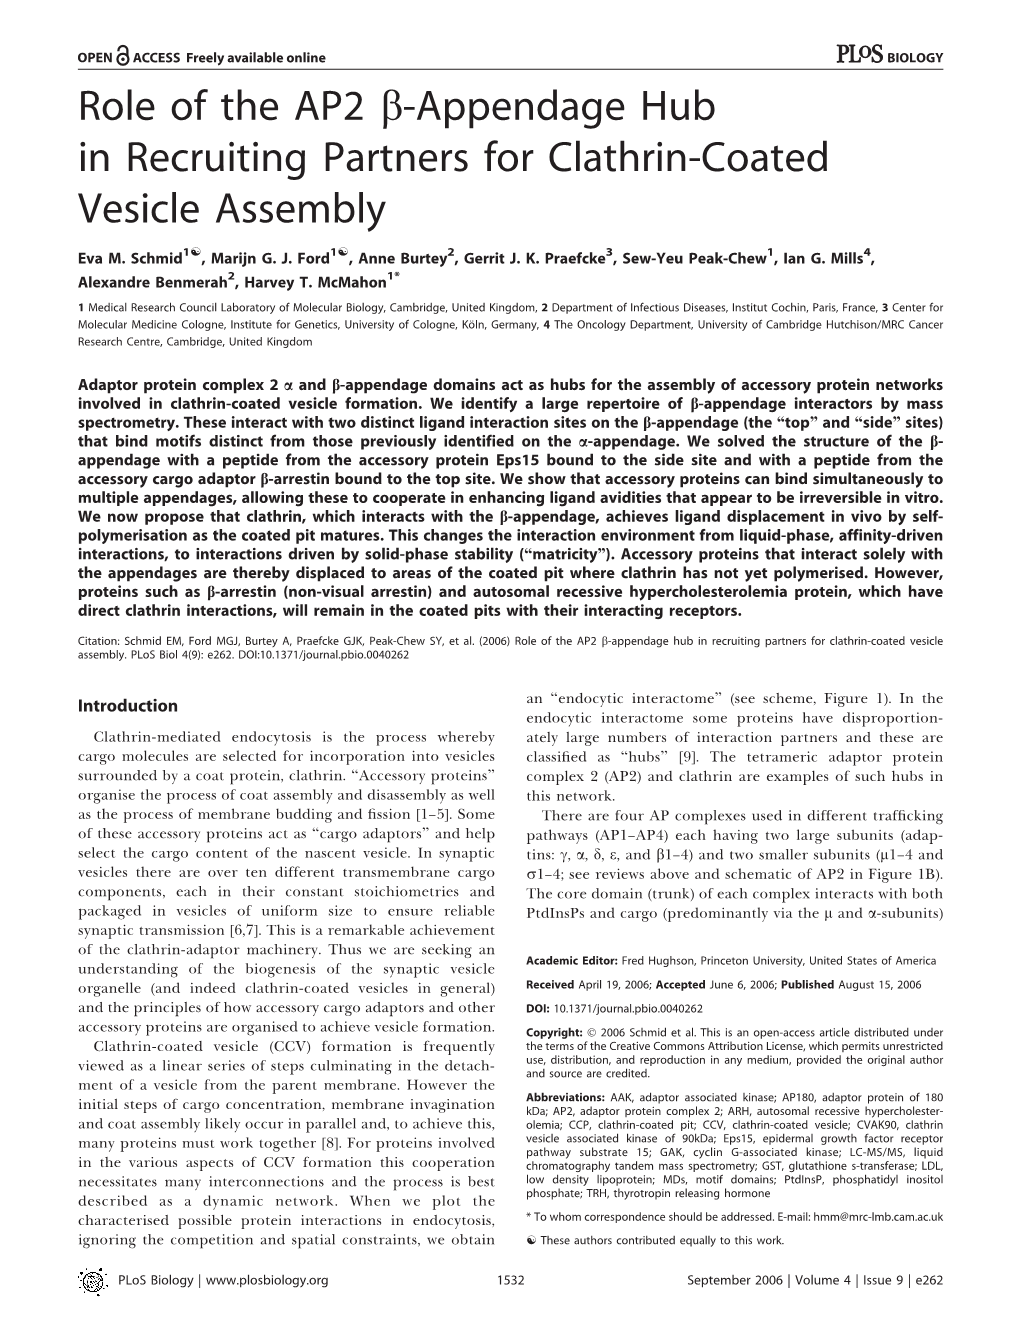 Role of the AP2 B-Appendage Hub in Recruiting Partners for Clathrin-Coated Vesicle Assembly